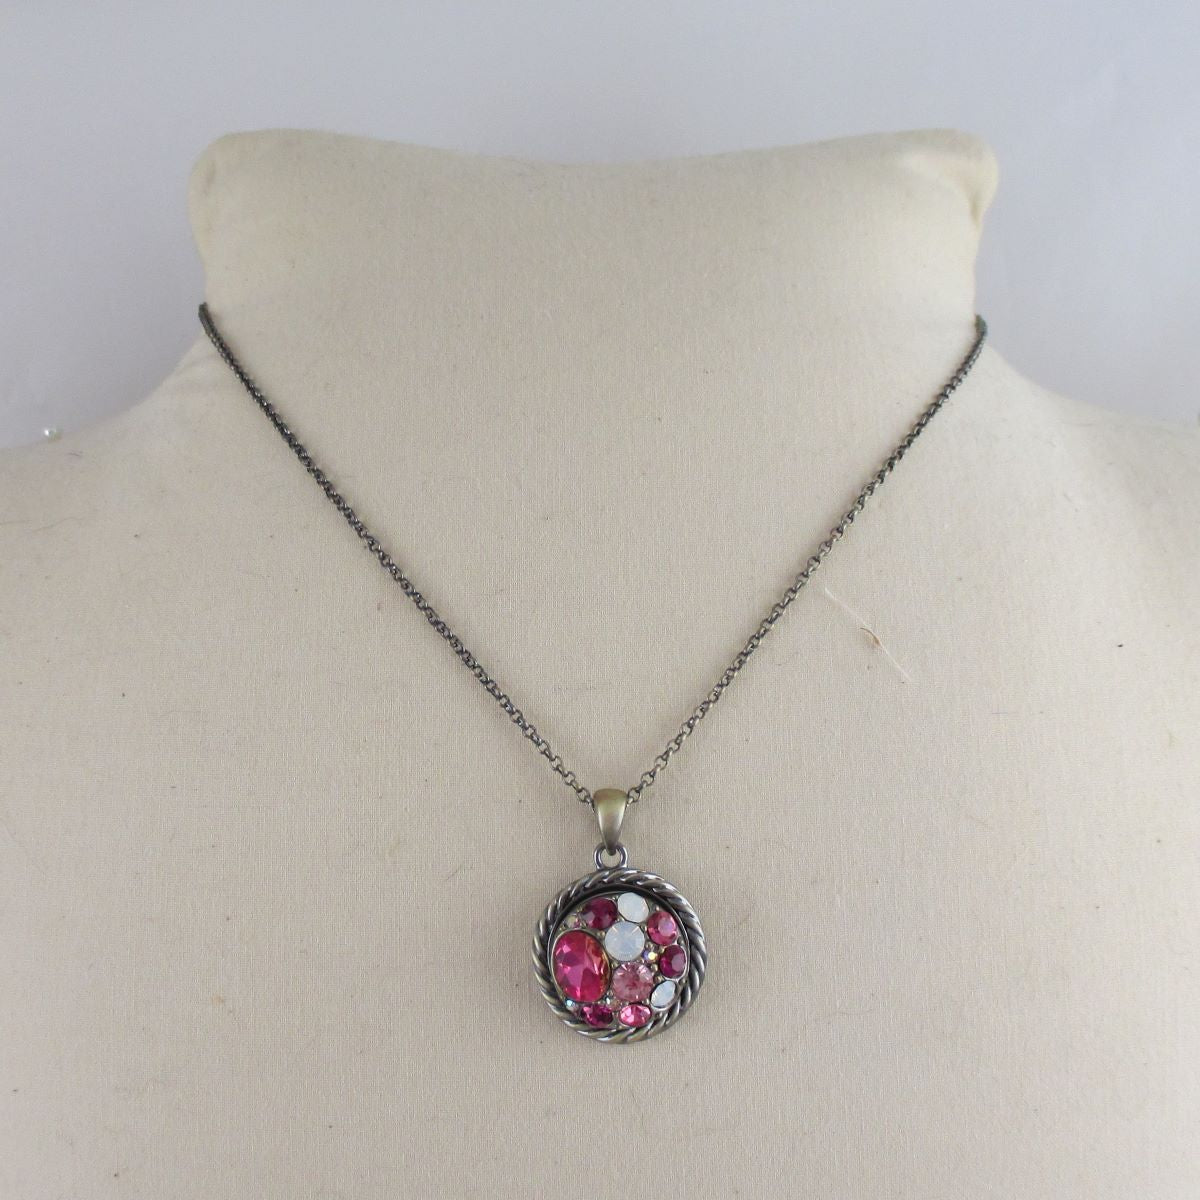 Pink Multi-stoned Crystal & Antique Brass Pendant Necklace - VP's Jewelry